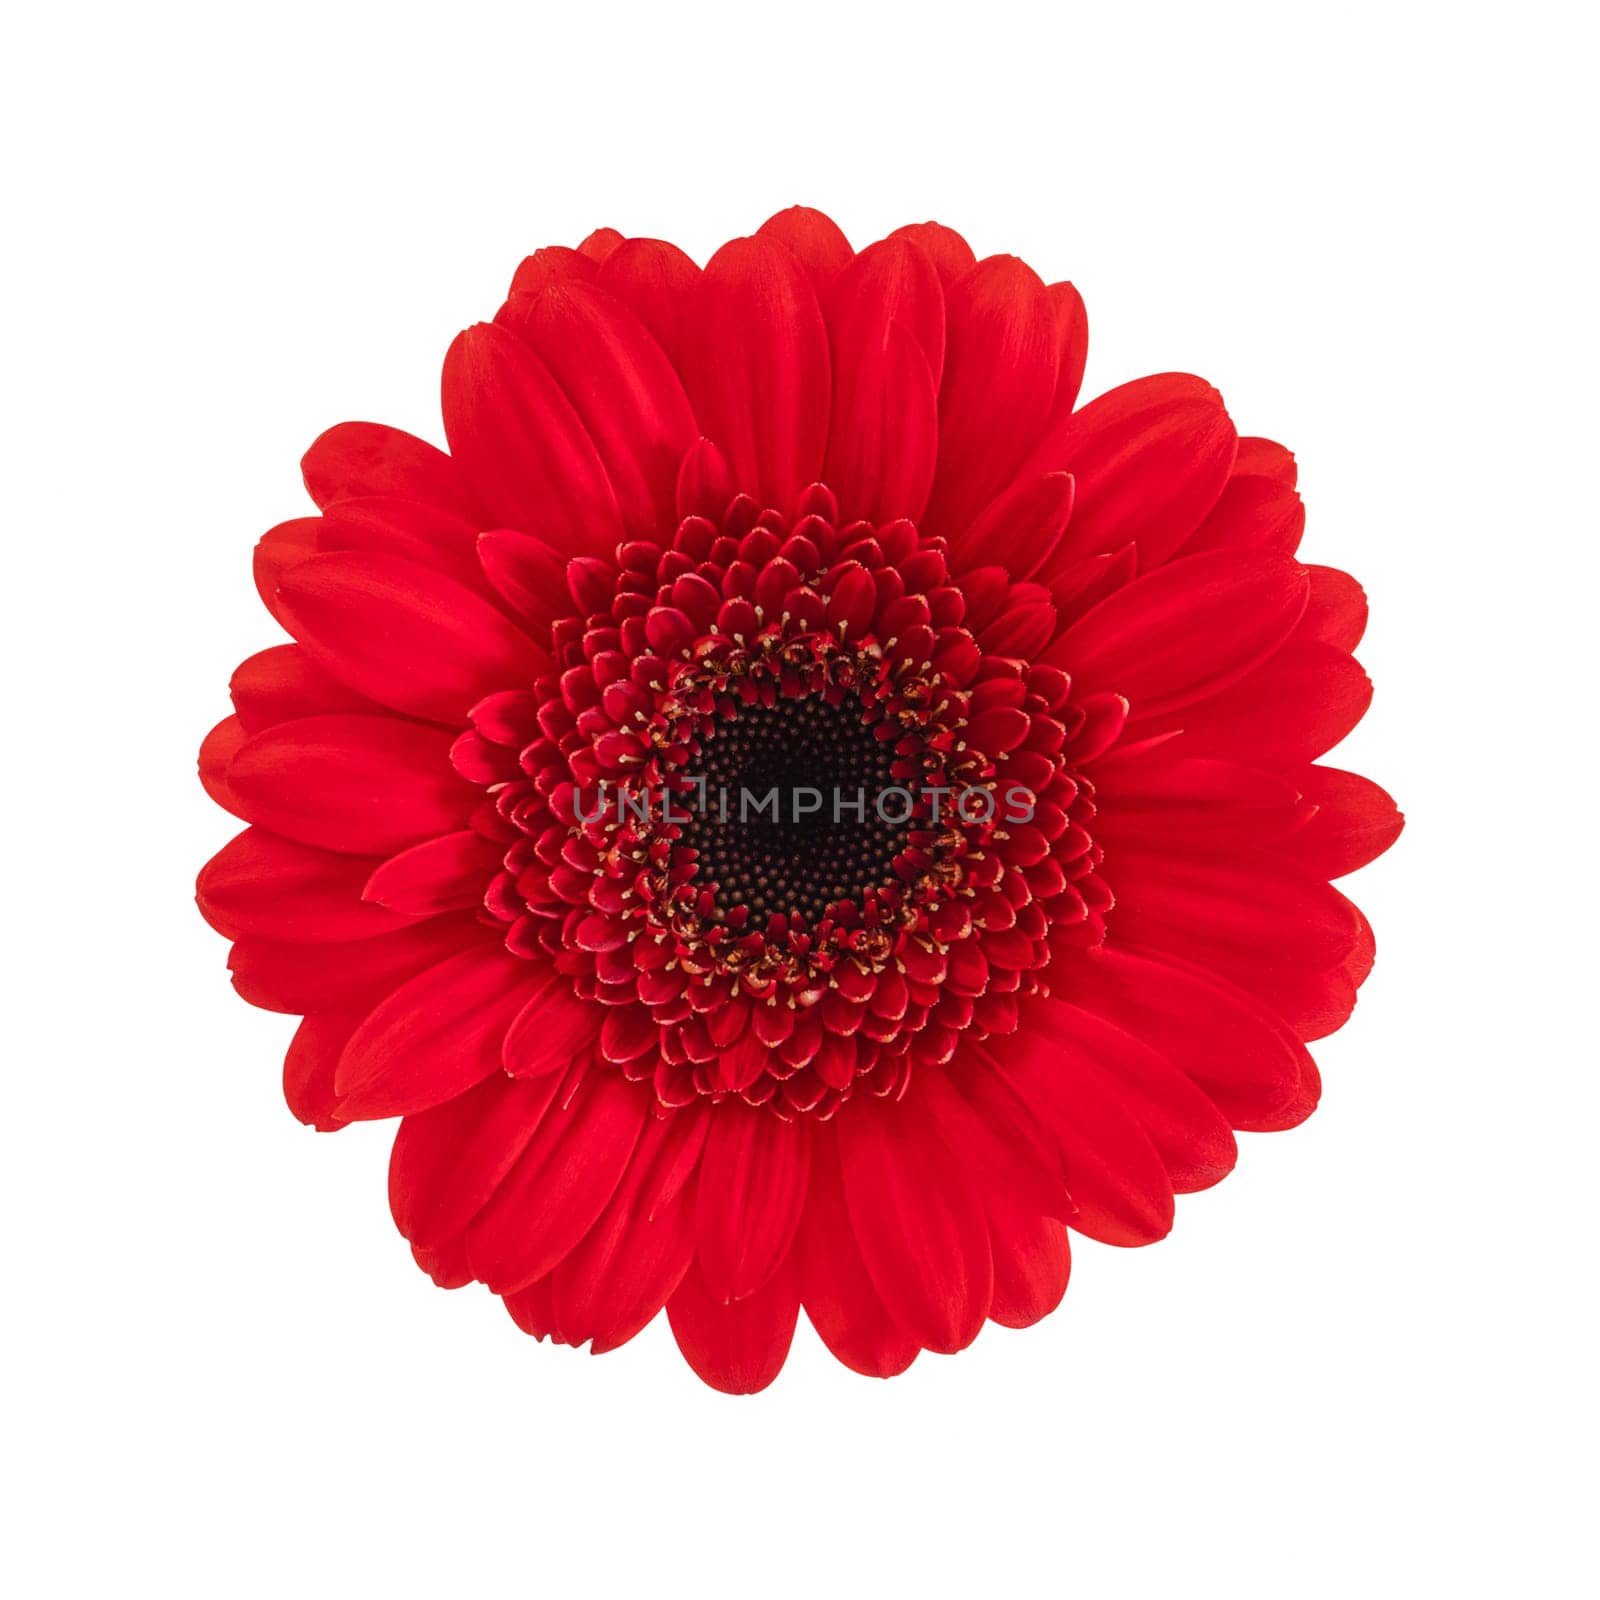 Red gerbera flower isolated on a white background. Stock photo.